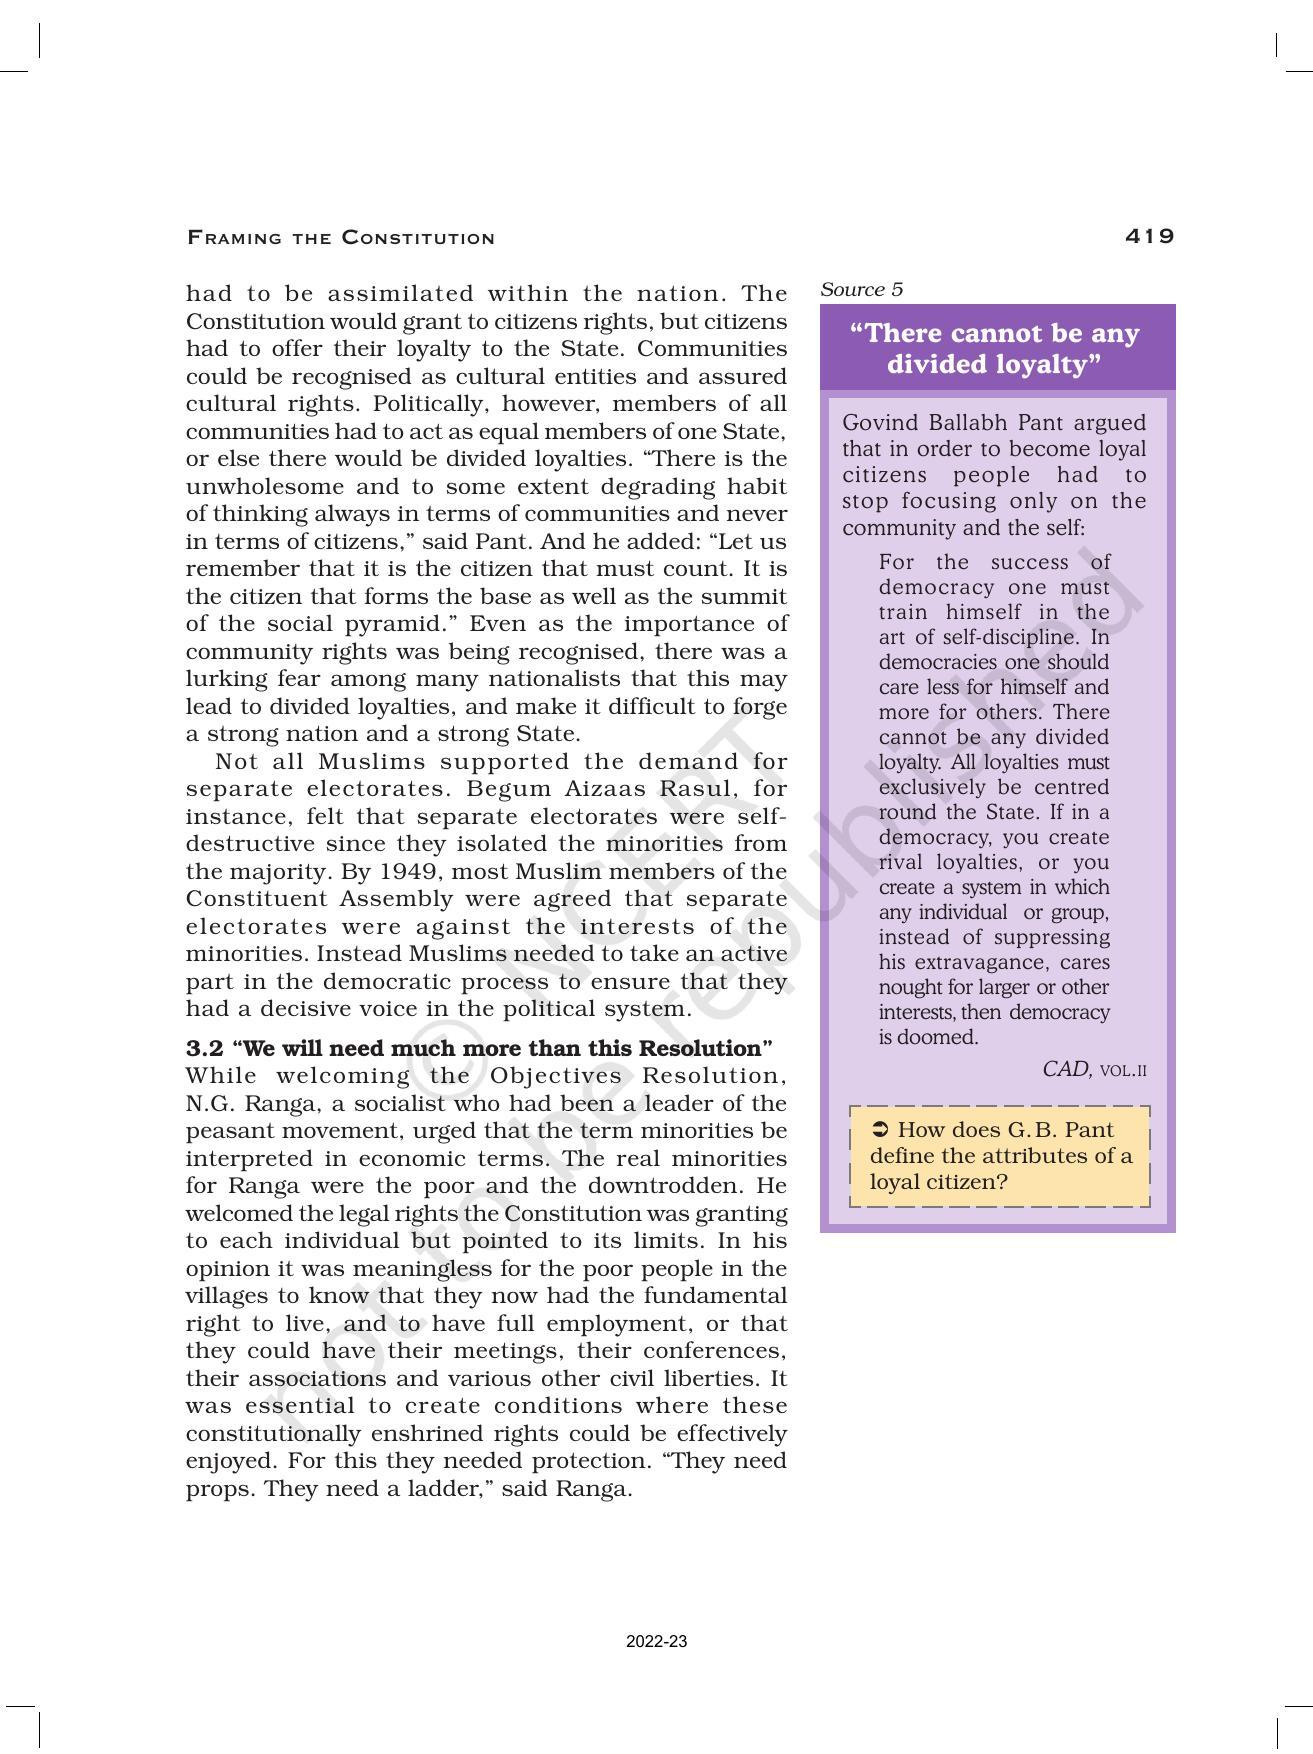 NCERT Book for Class 12 History (Part-III) Chapter 15 Framing and the Constitution - Page 15